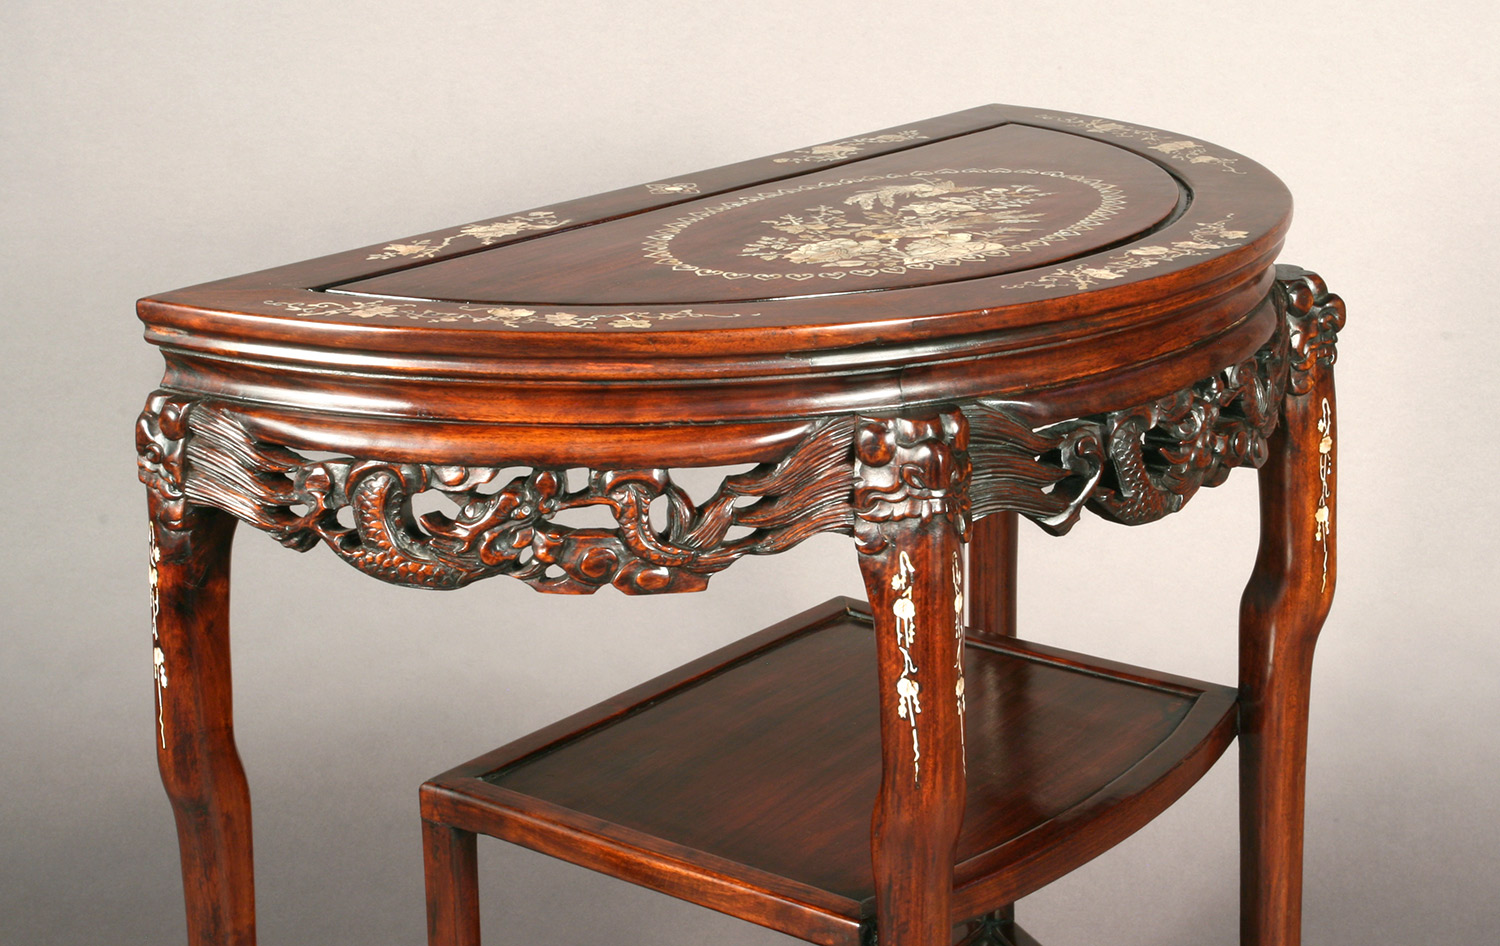 Details about   Wooden Rosewood Table with Intricate Handmade Brass Inlay Work on Top 